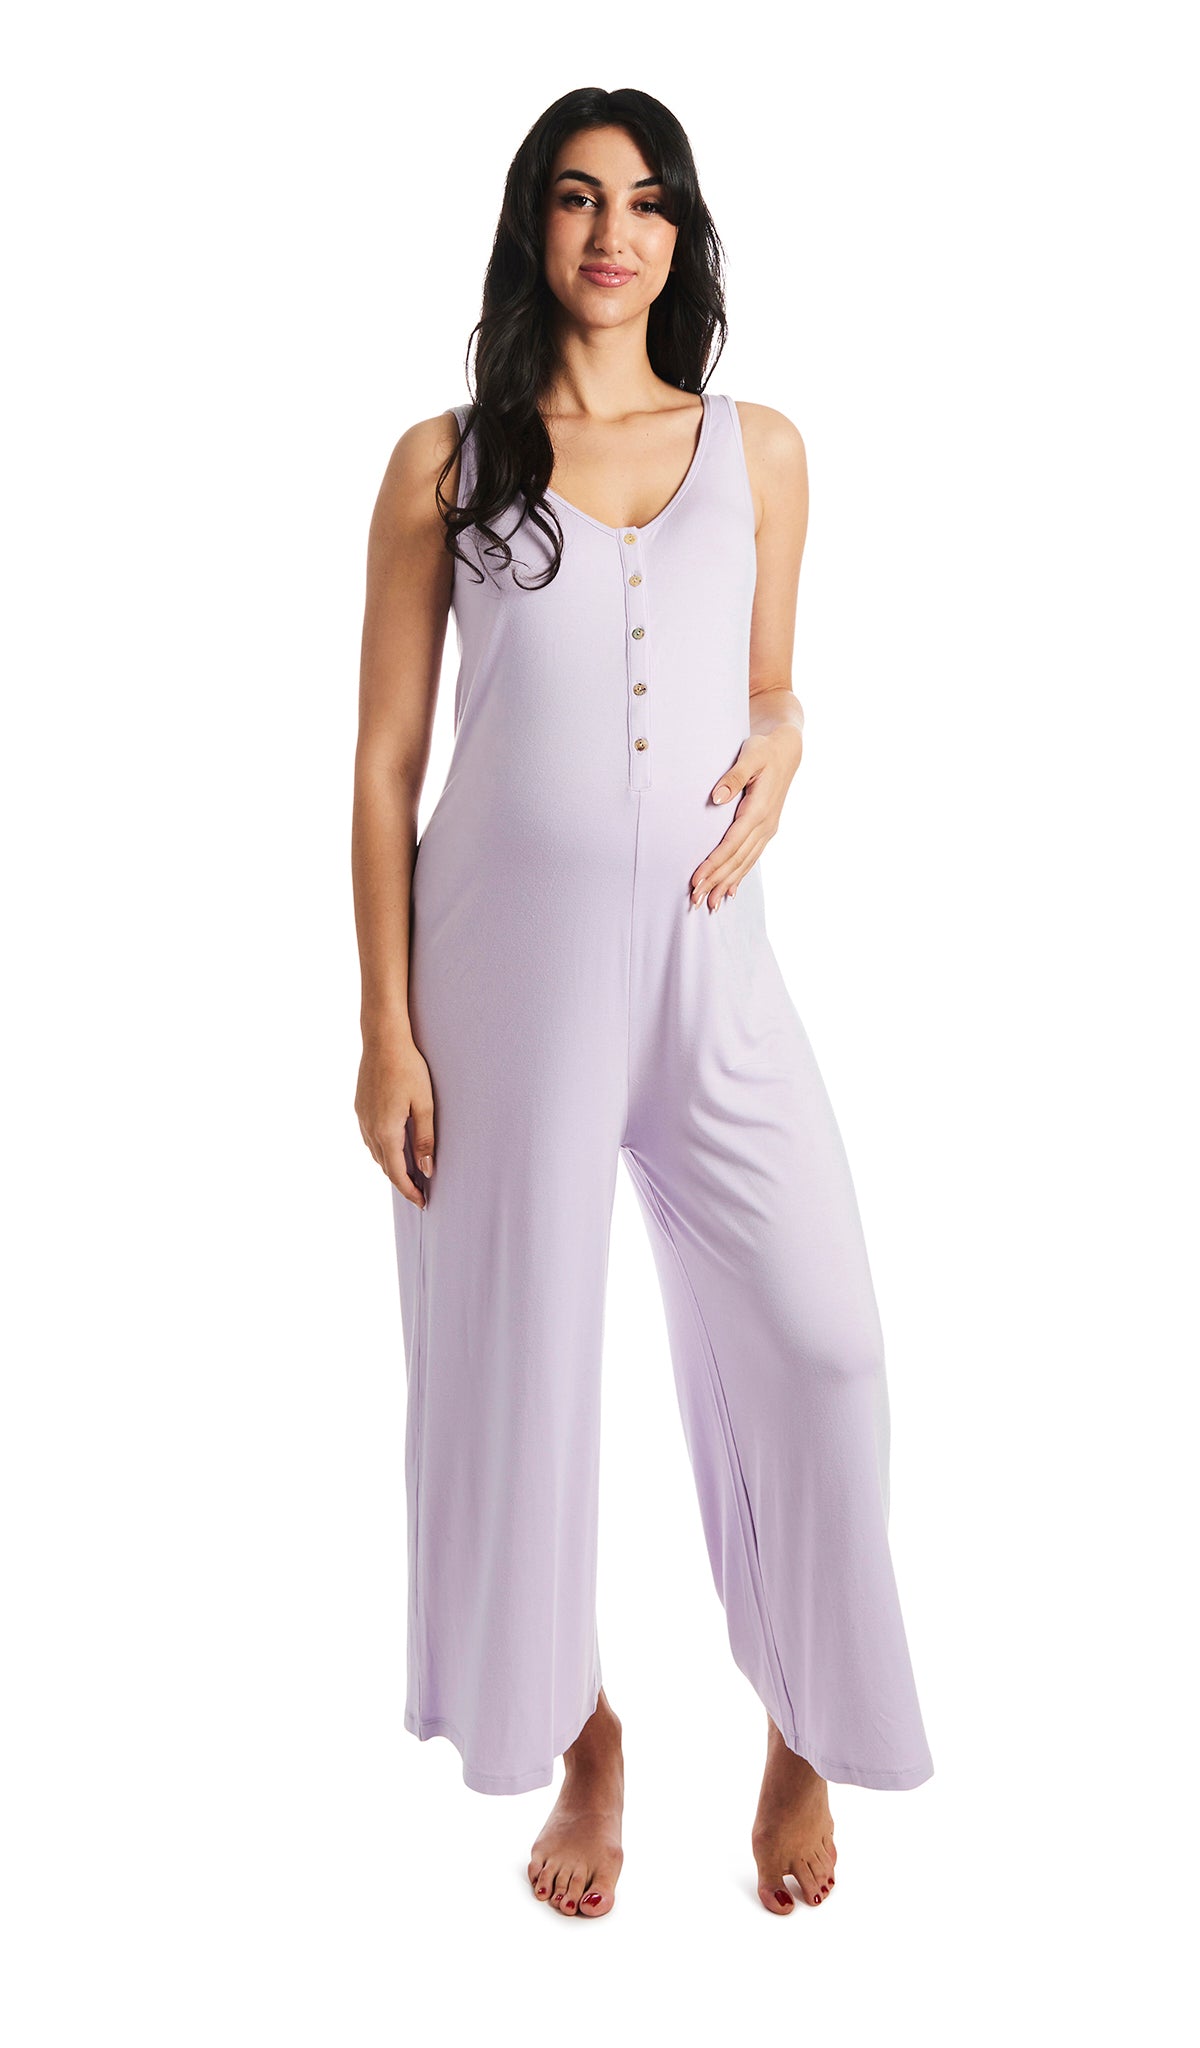 Lavender Luana romper. Pregnant woman with one hand on belly, wearing sleeveless wide-leg romper with scoop-neckline with button-front placket. 